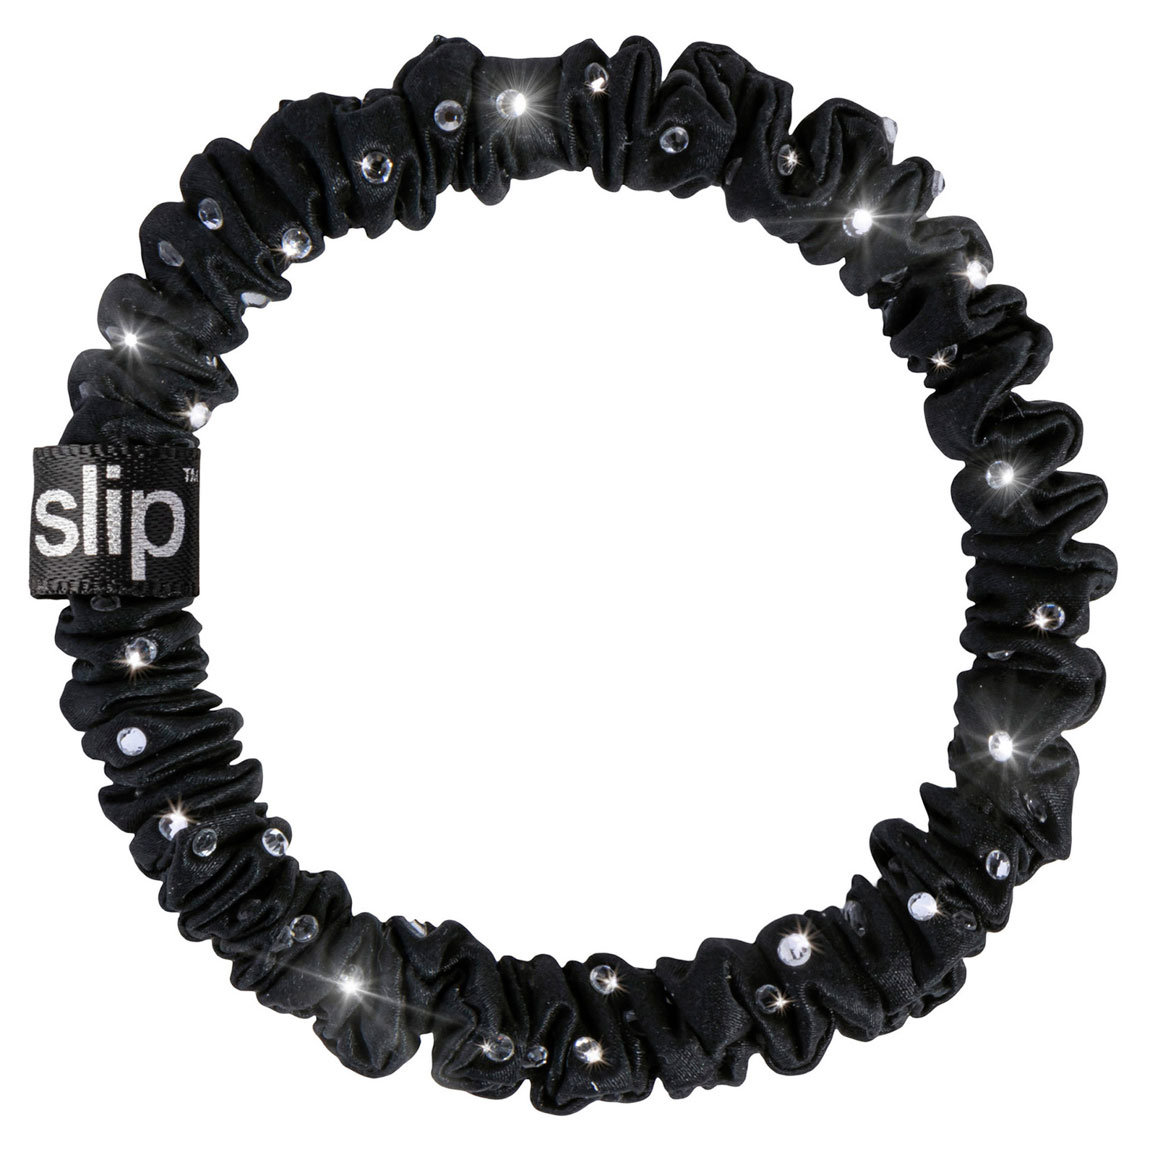 Free Crystal Skinny Scrunchie in Black with qualifying slip purchase